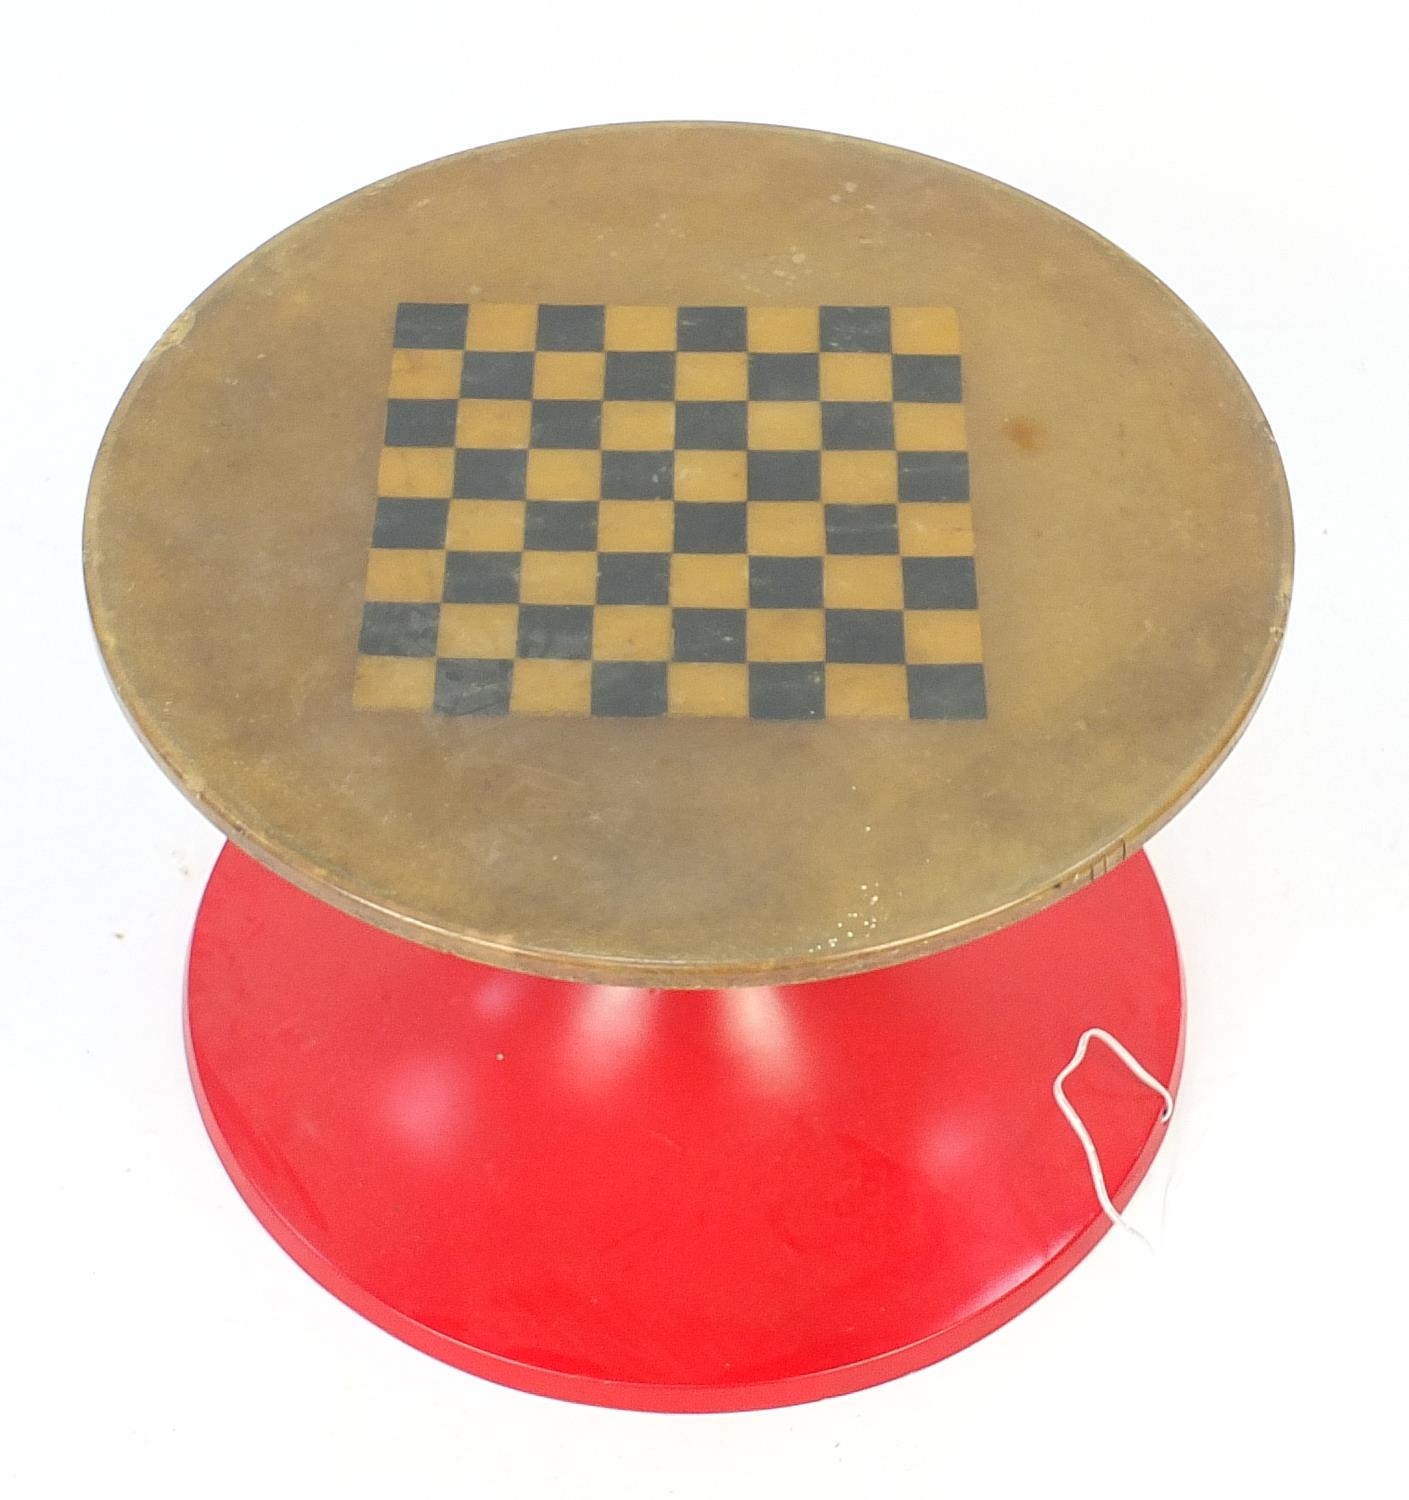 Sarah Hamilton Perspex illuminated chess table, 41cm high x 67cm in diameter : For Further Condition - Image 2 of 4